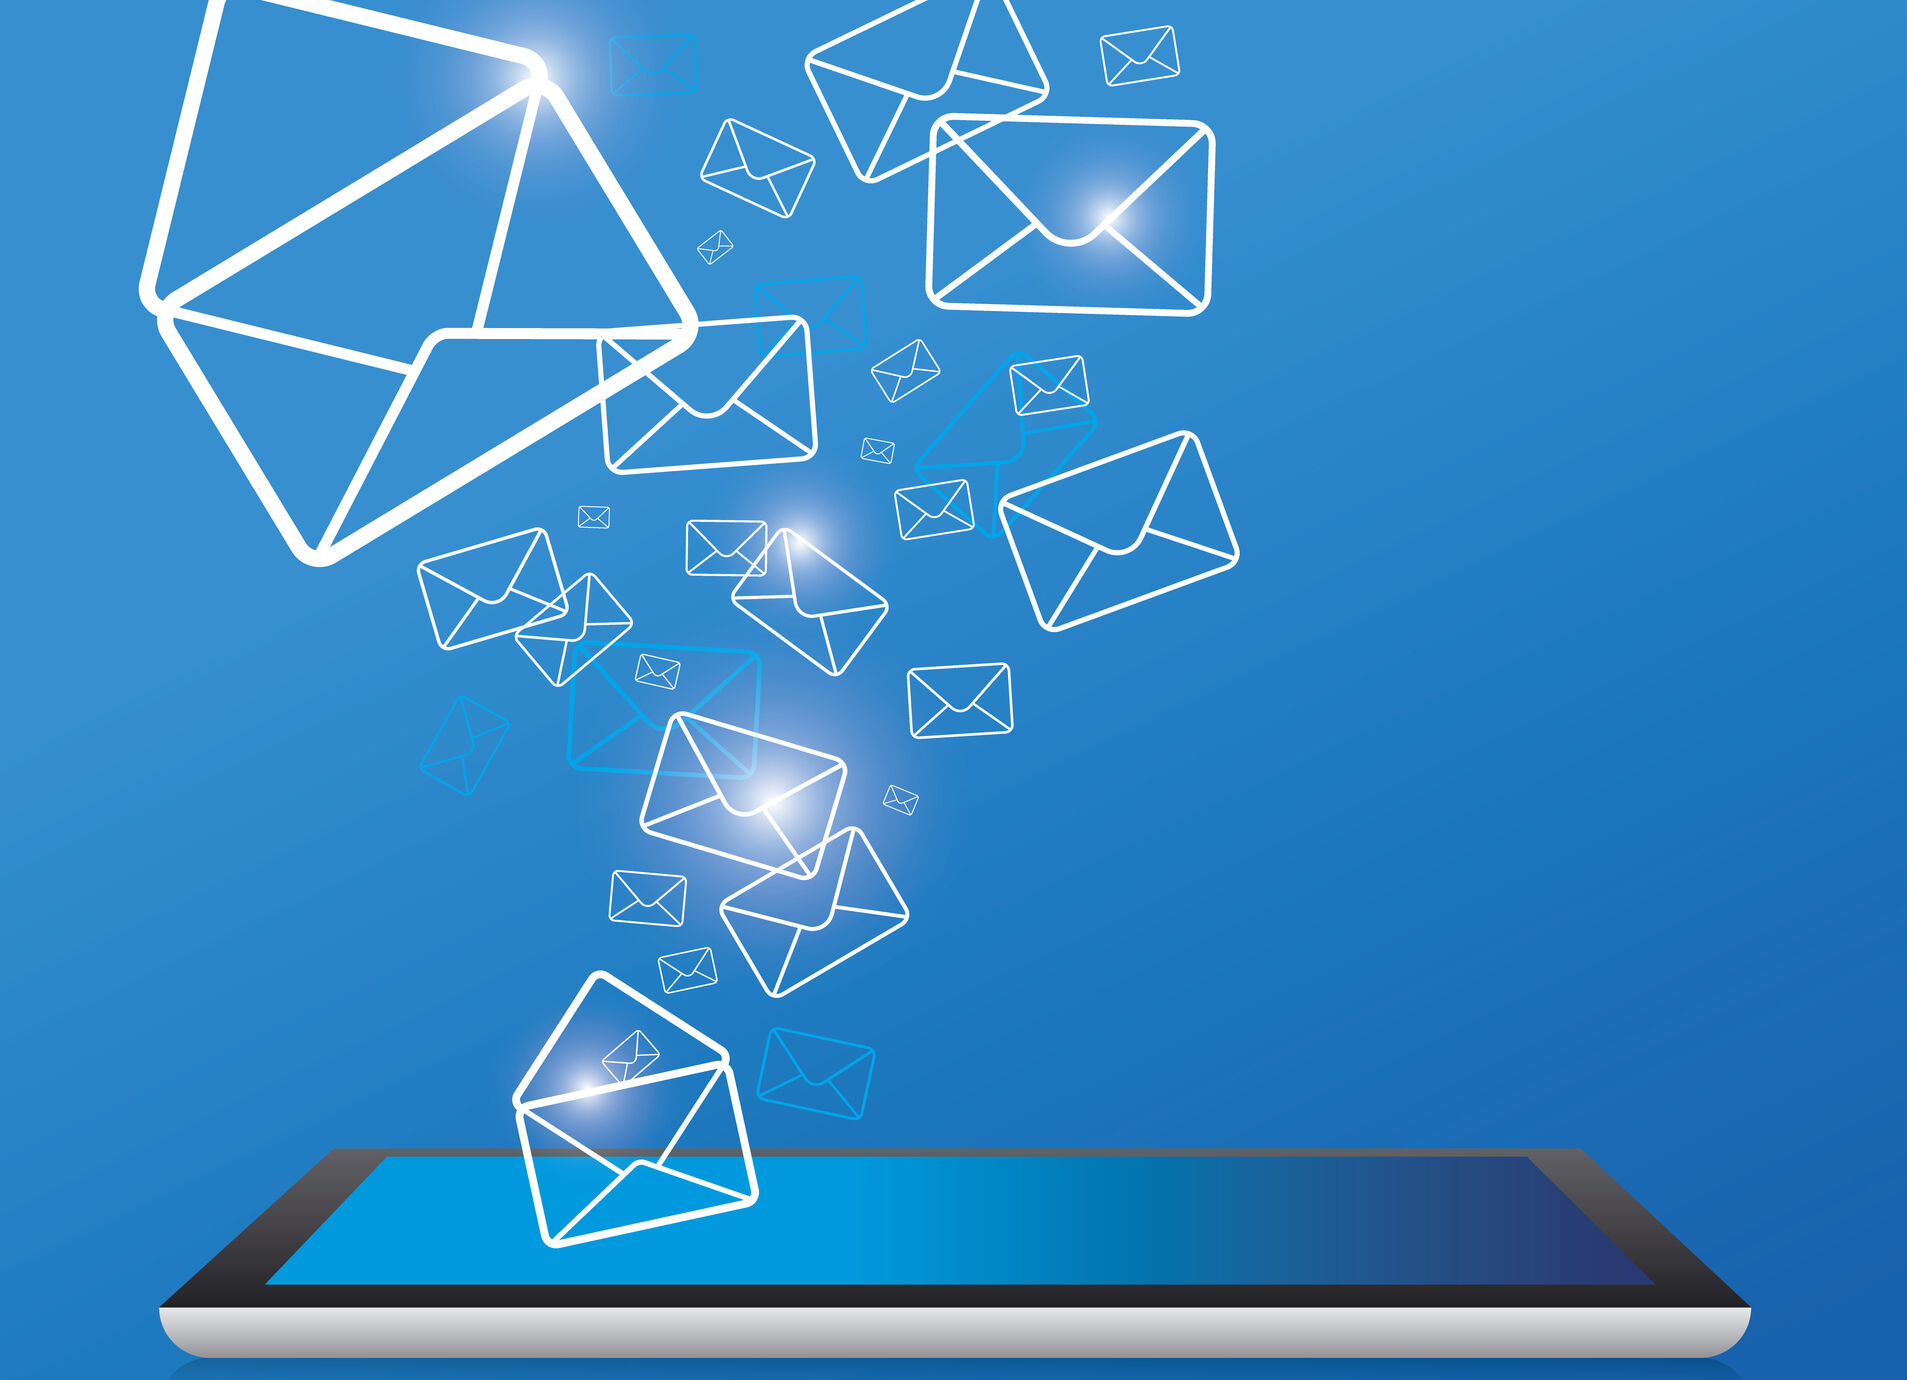 Email Marketing Newsletter ipad with email icons lifting off the surface